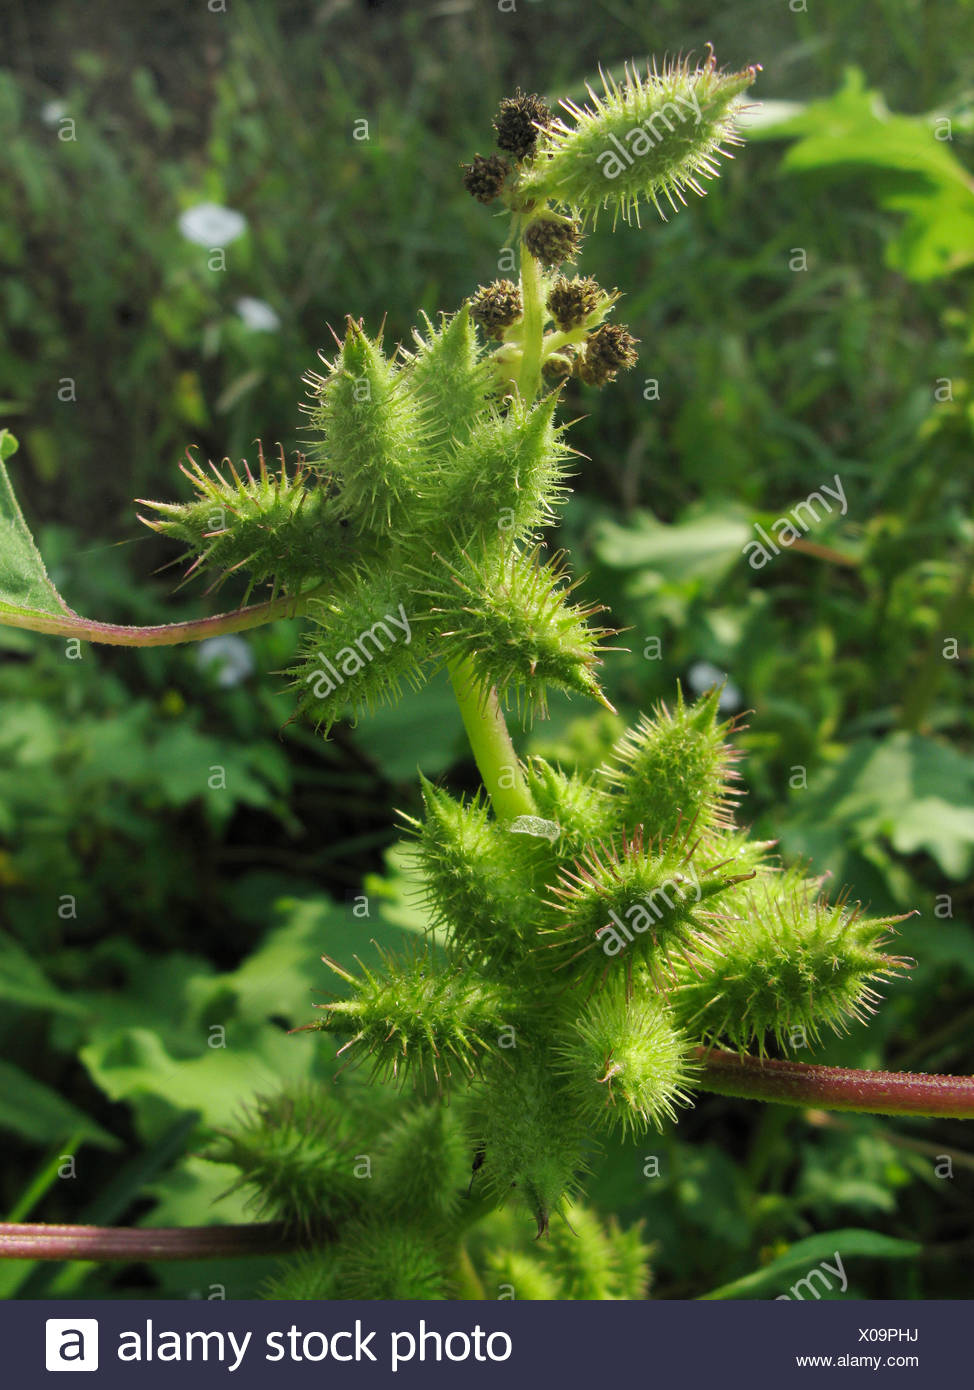 Cocklebur High Resolution Stock Photography and Images - Alamy